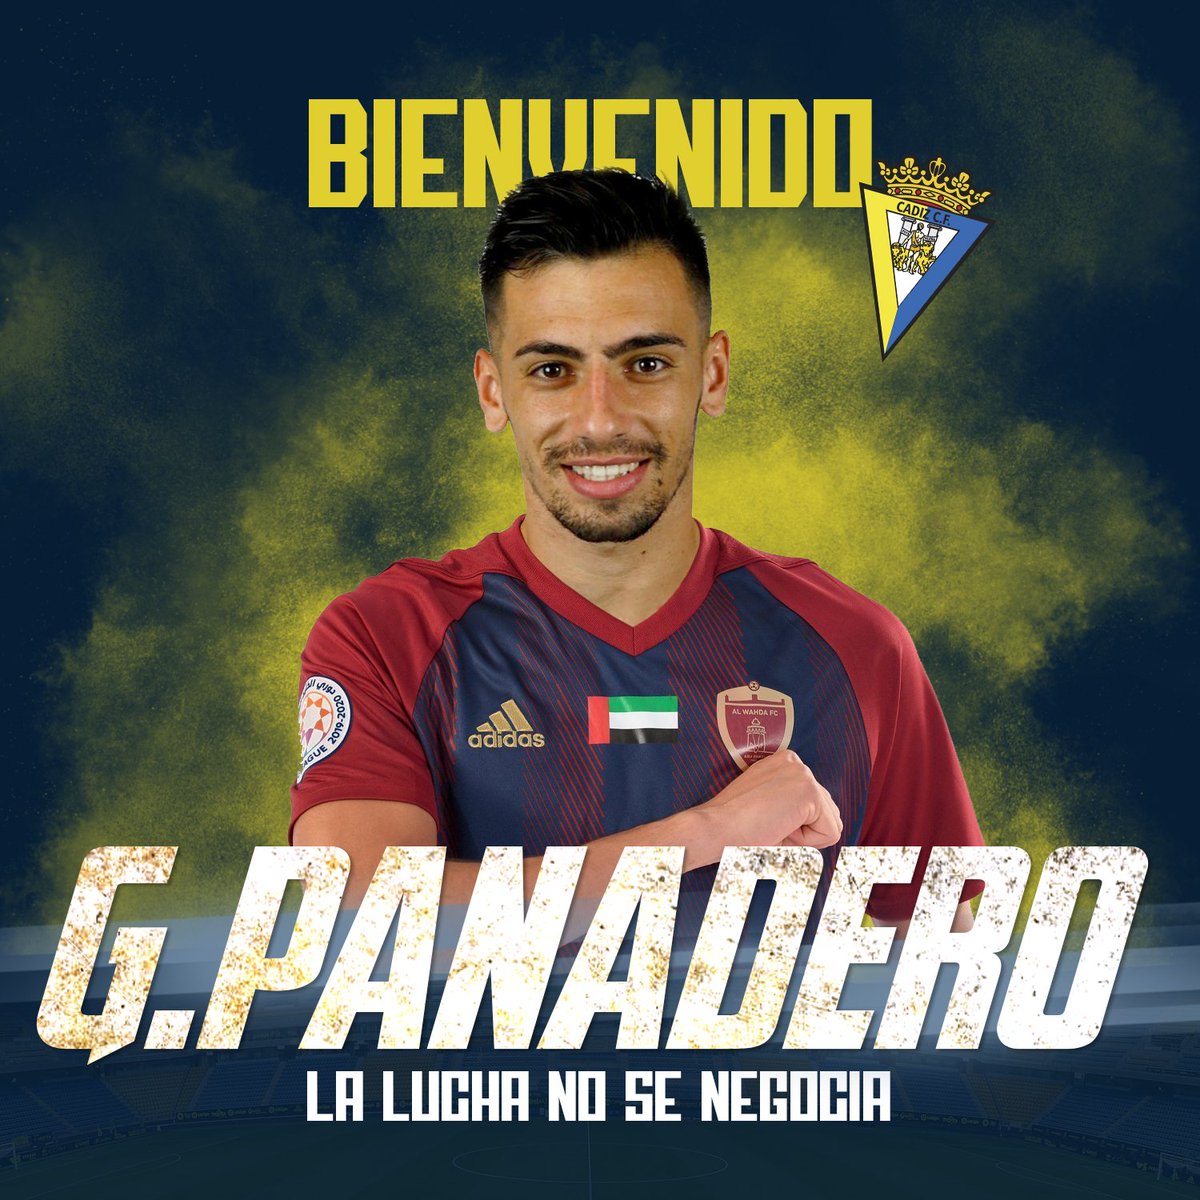  DONE DEAL  - August 1GASPAR PANADERO(Free agent to Cádiz )Age: 22Country: Spain  Position: WingerFee: Free Contract: Until 2023  #LLL